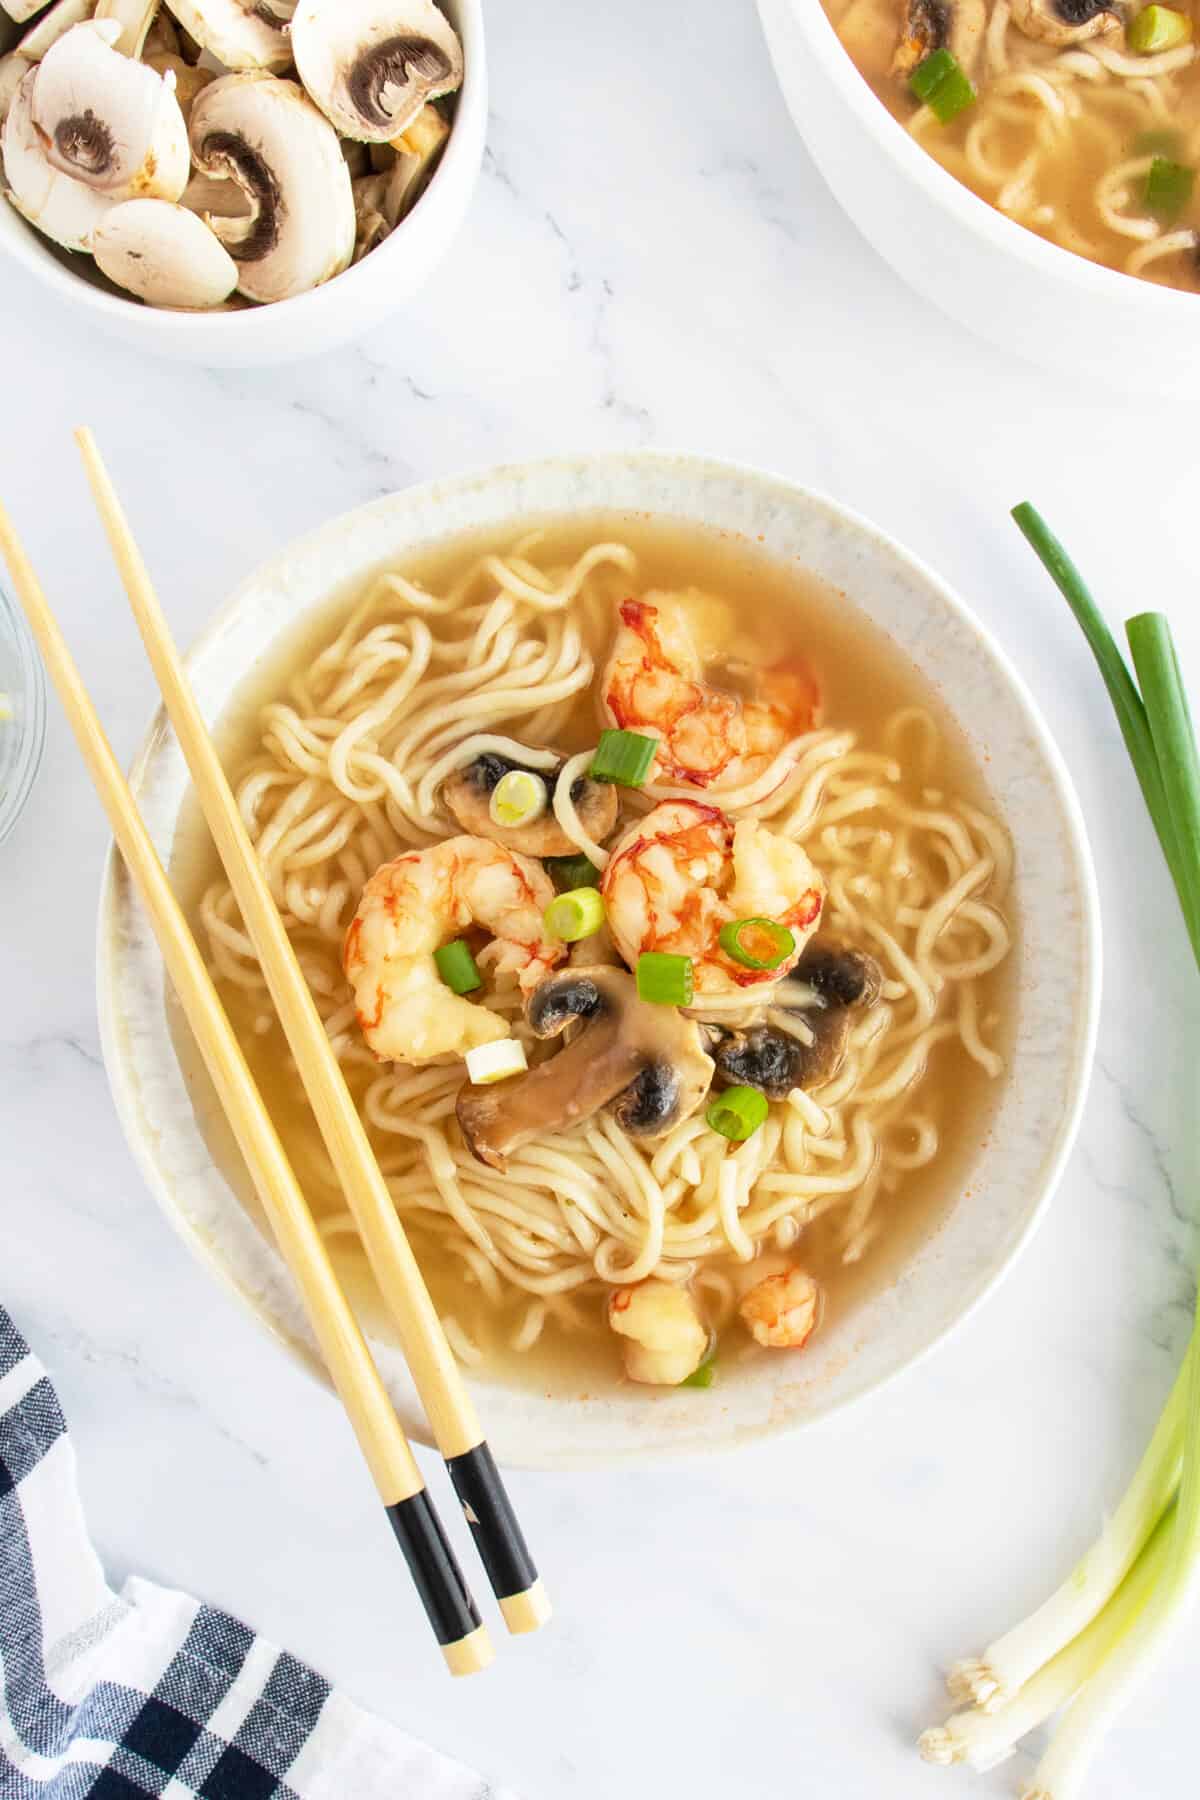 Shrimp soup with chopsticks on top of the bowl